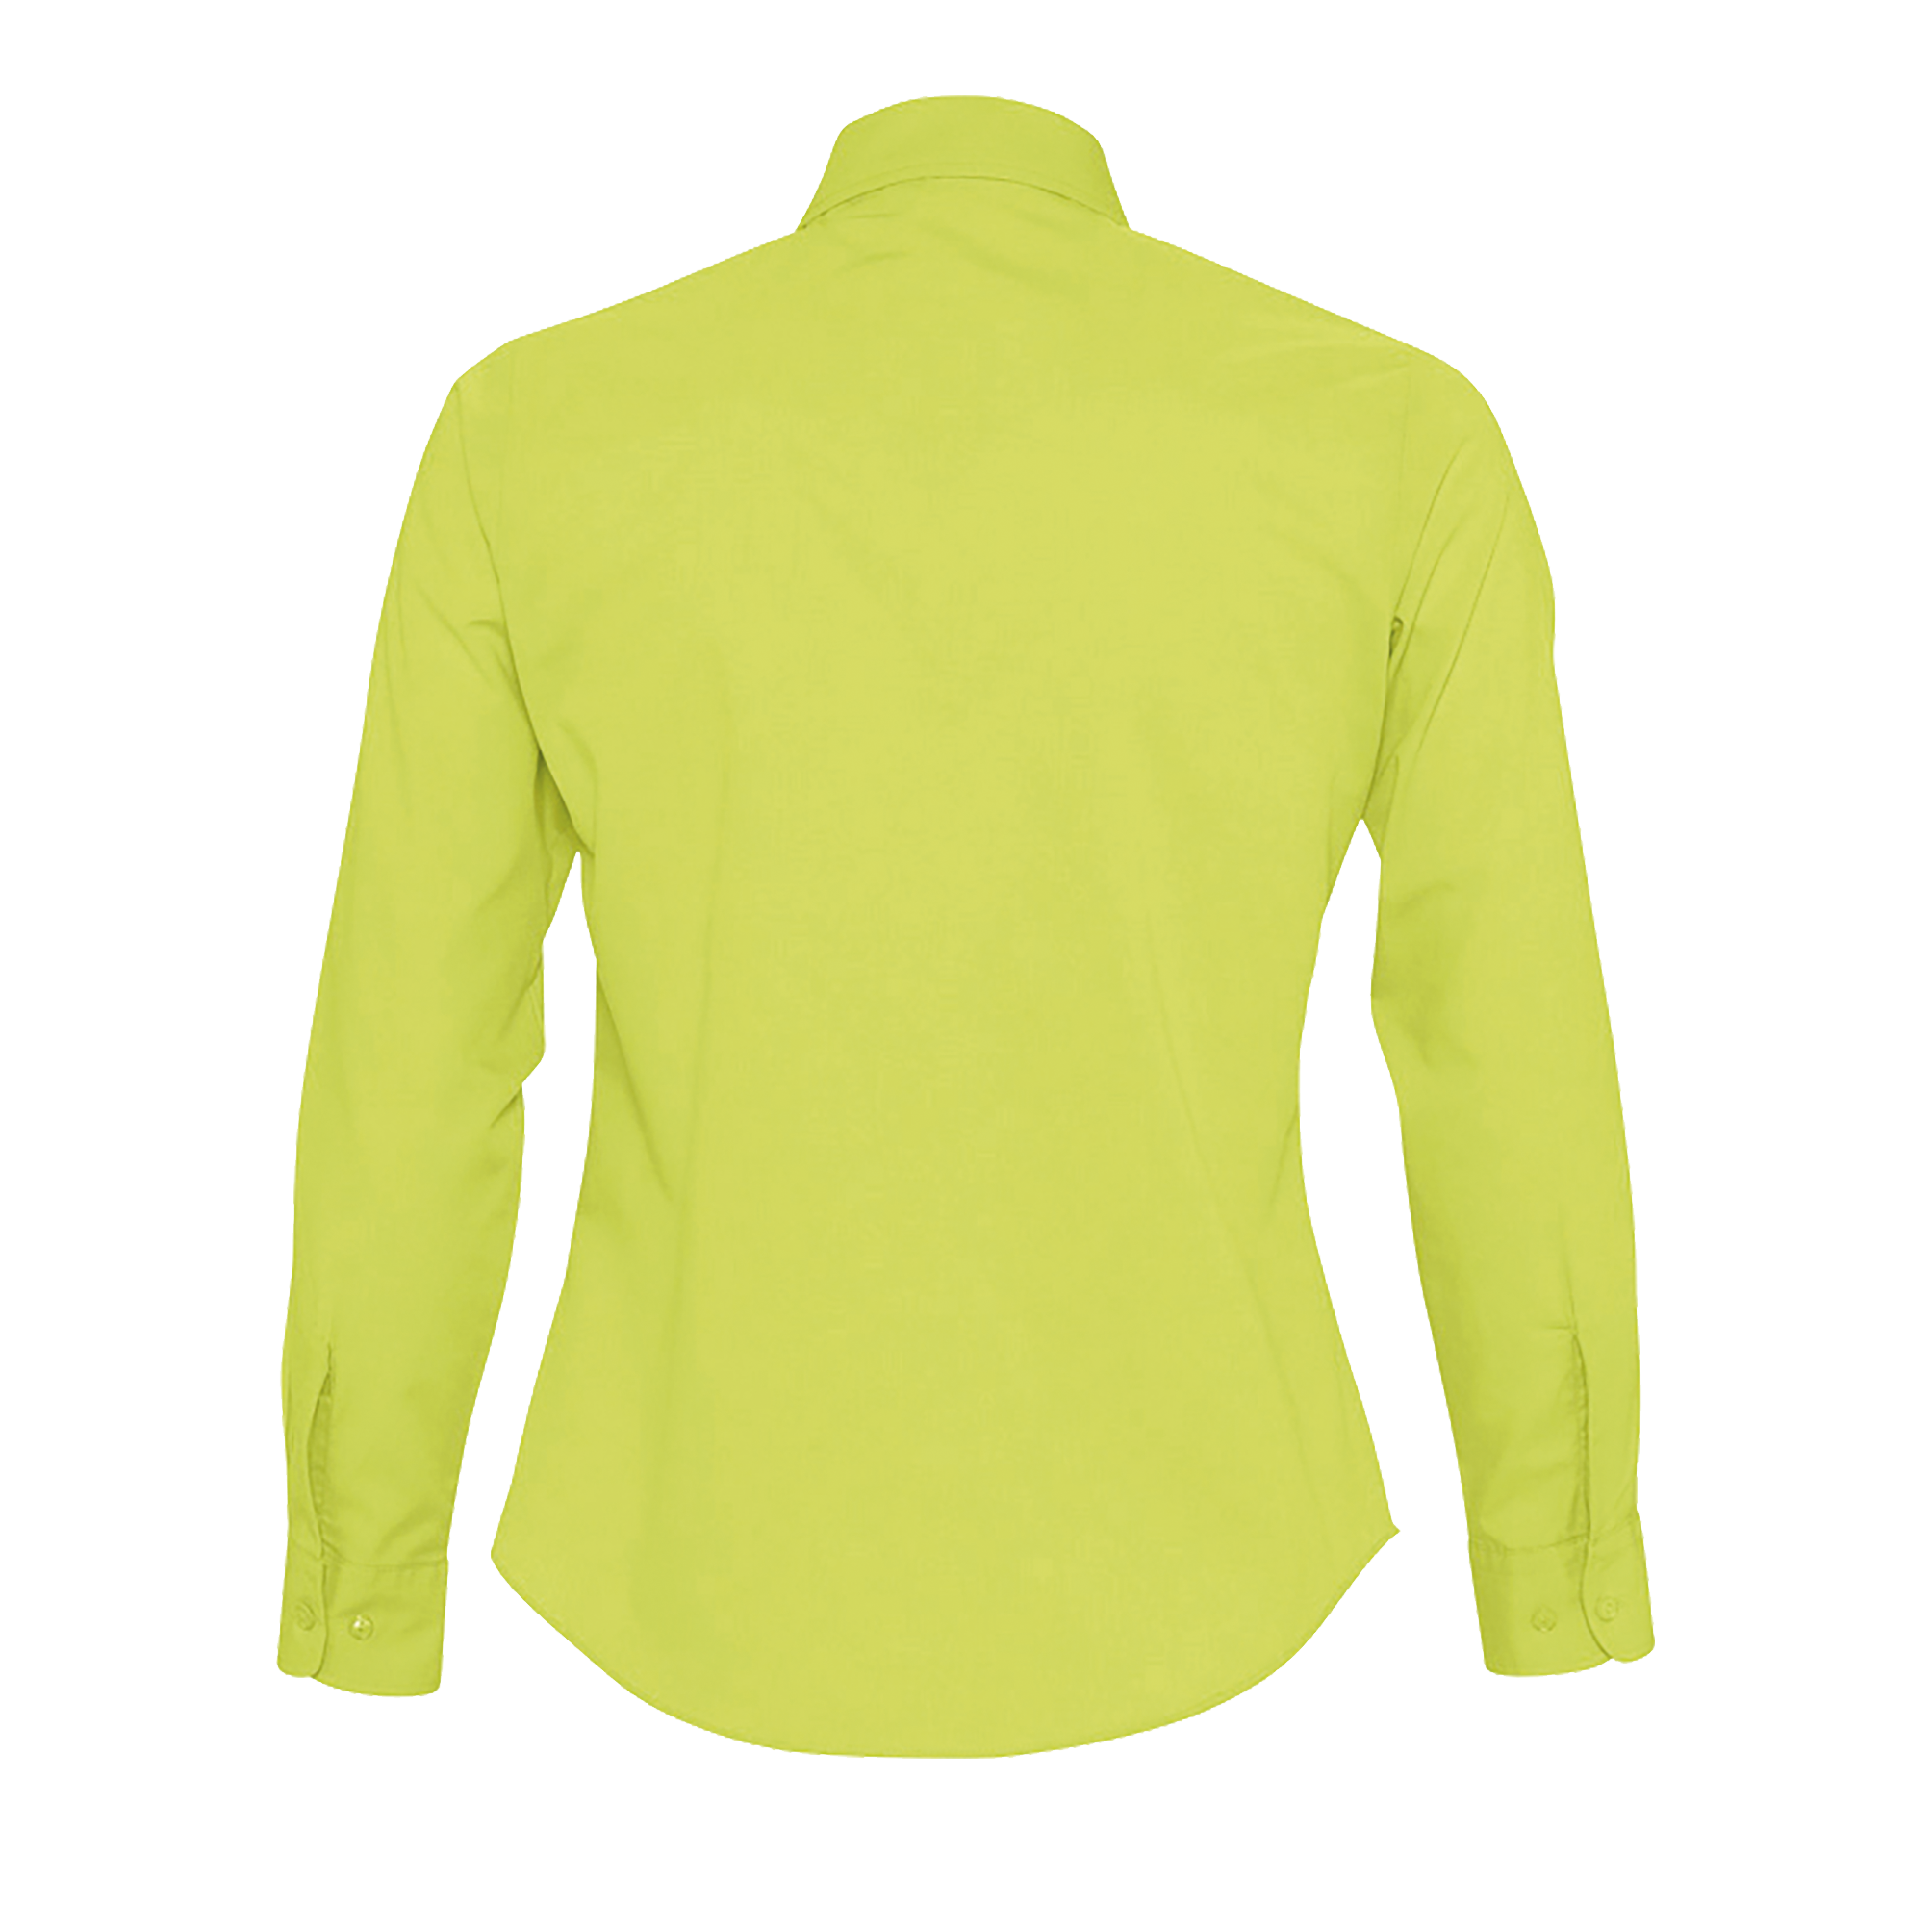 images/stories/virtuemart/sols20/1867_chemise_femme_popeline_manches_longues_executive_apple_green_dos